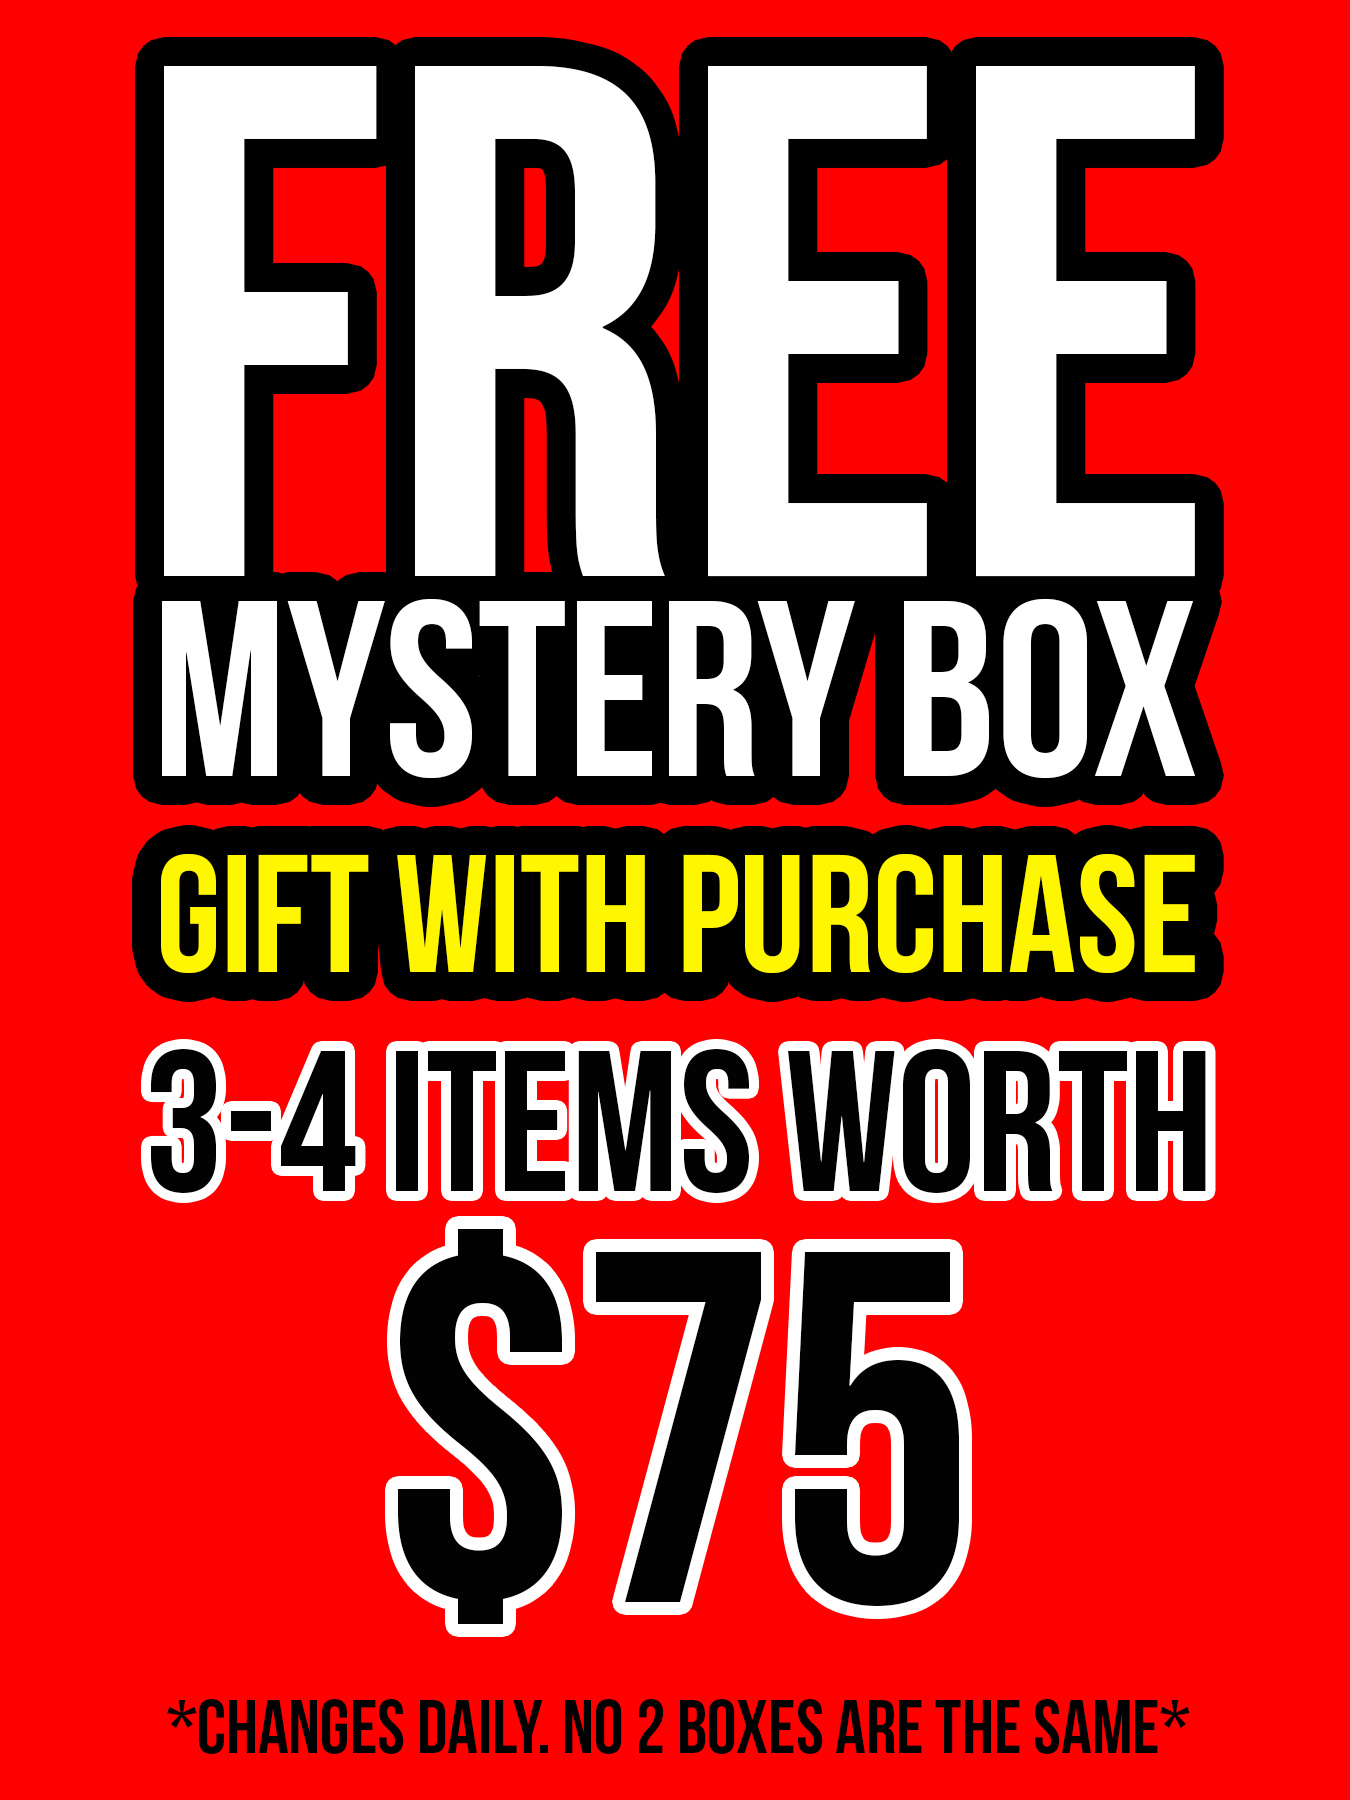  MYSTERY BOX GIFT WITH PURCHASE SxMITEMSIWORTH 